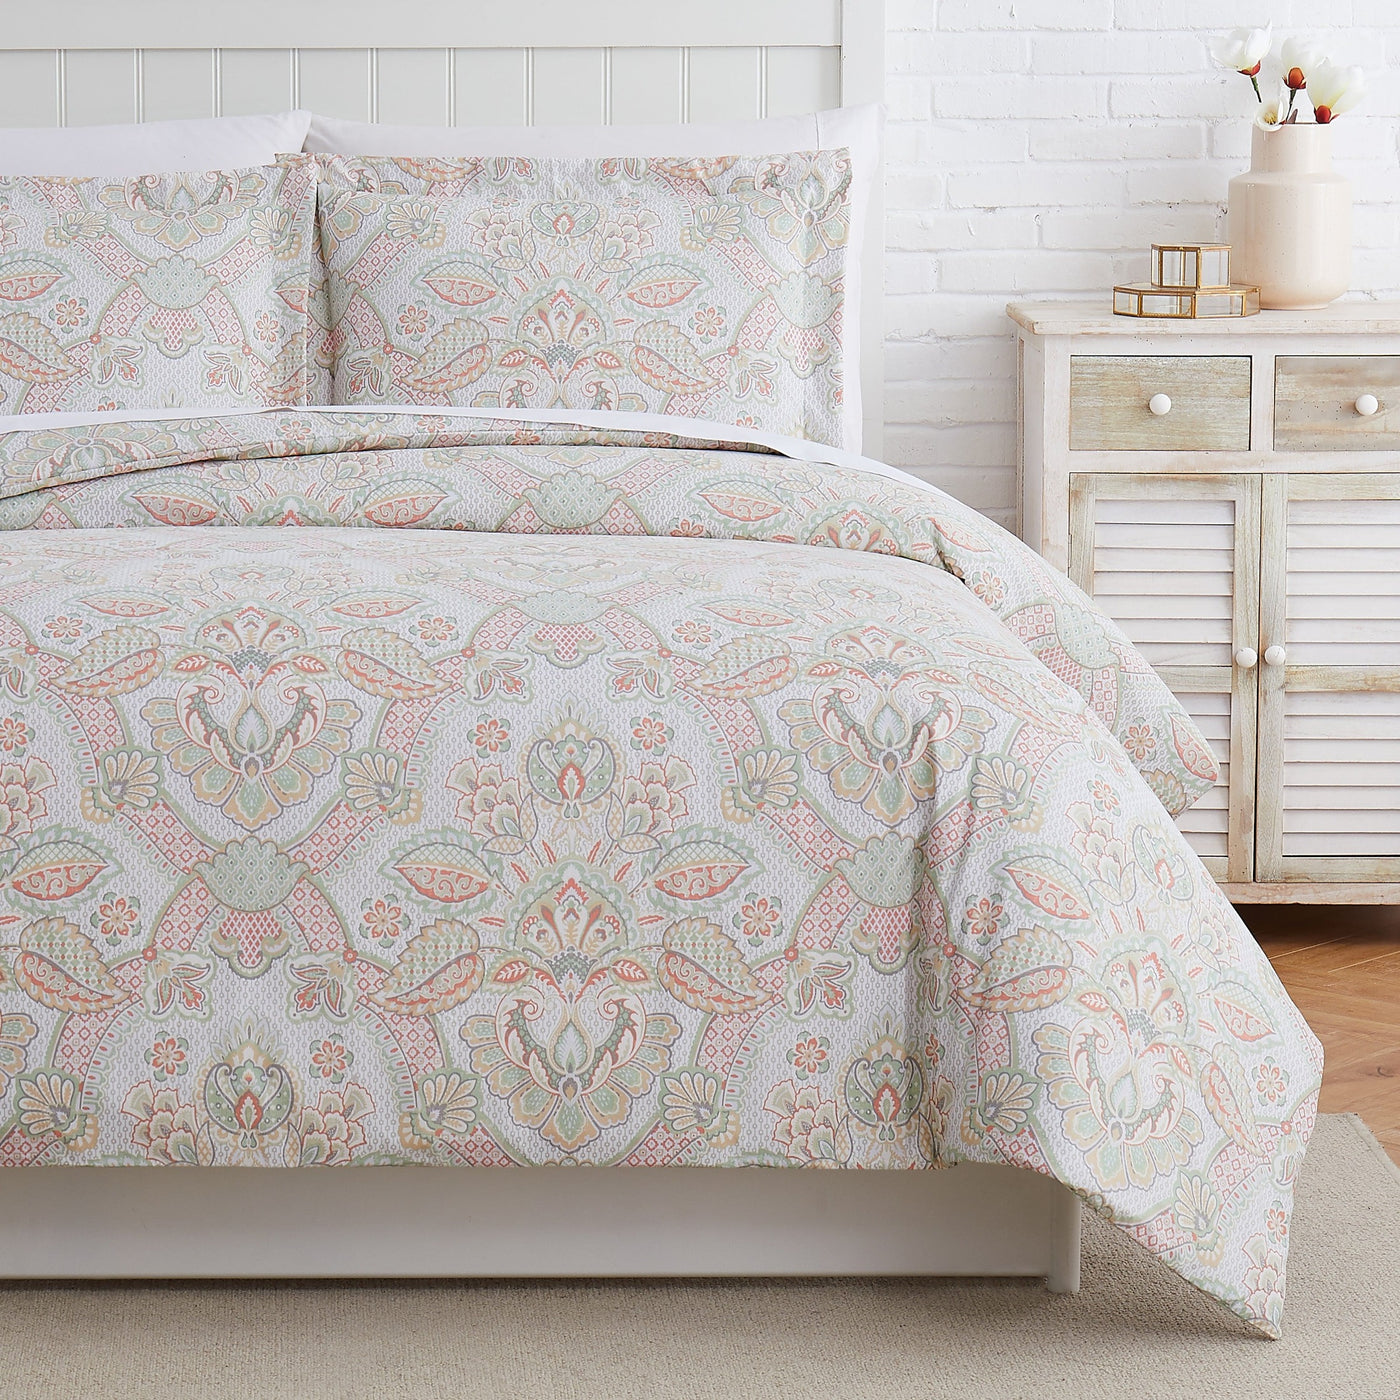 Half Front View of Enchantment Duvet Cover Set in Coral#color_enchantment-coral